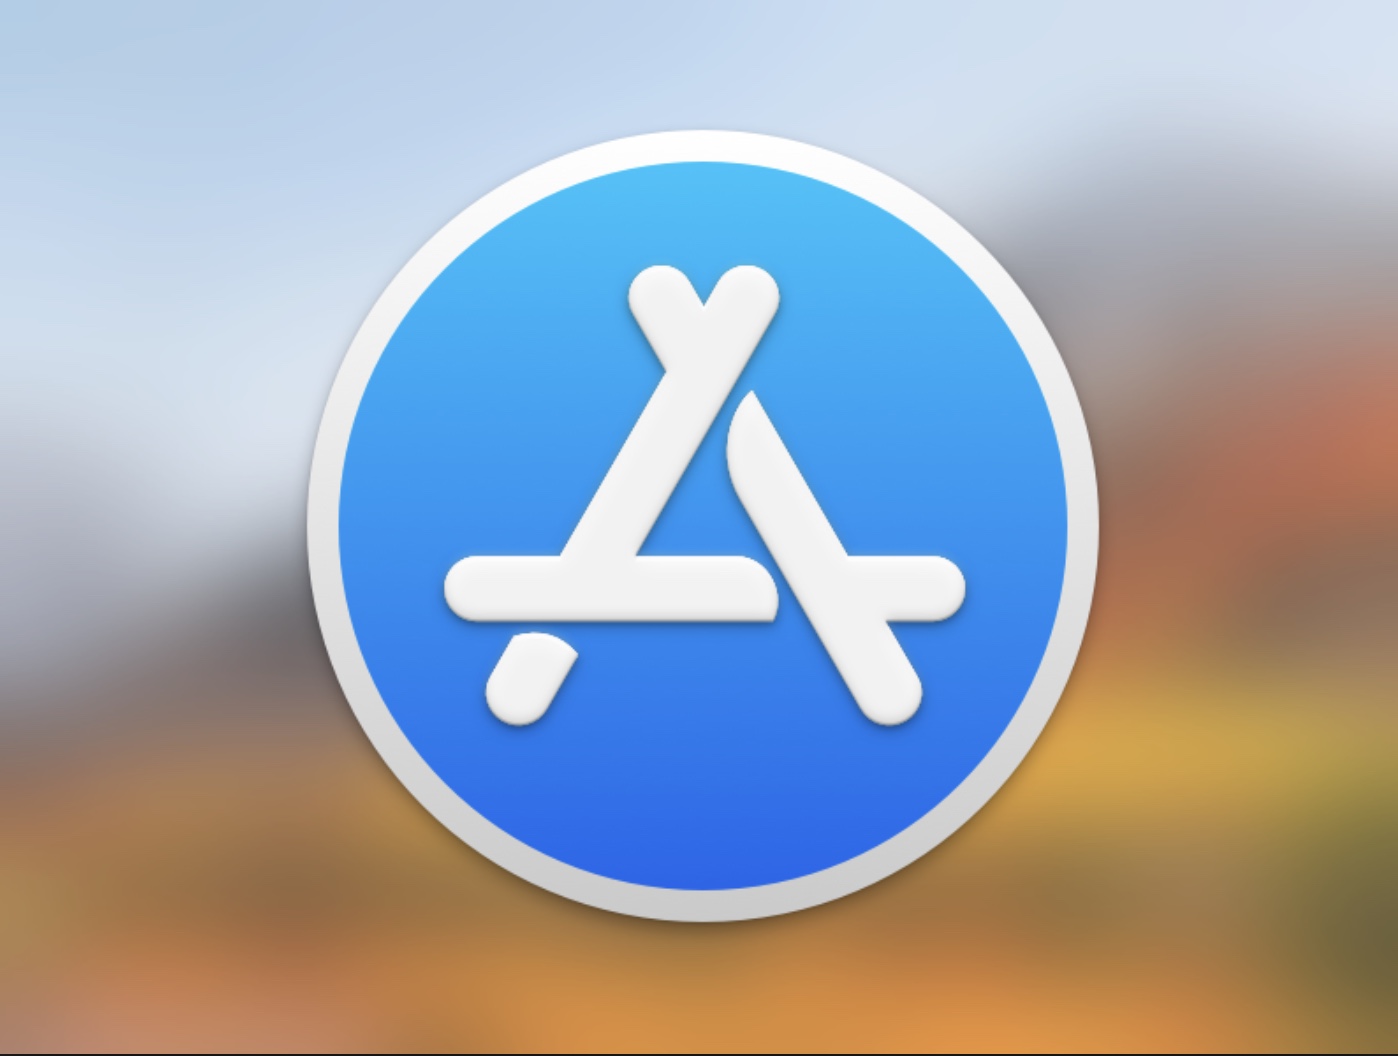 Developers, take note: apps submitted to the Mac App Store must be 64-bit by June 1